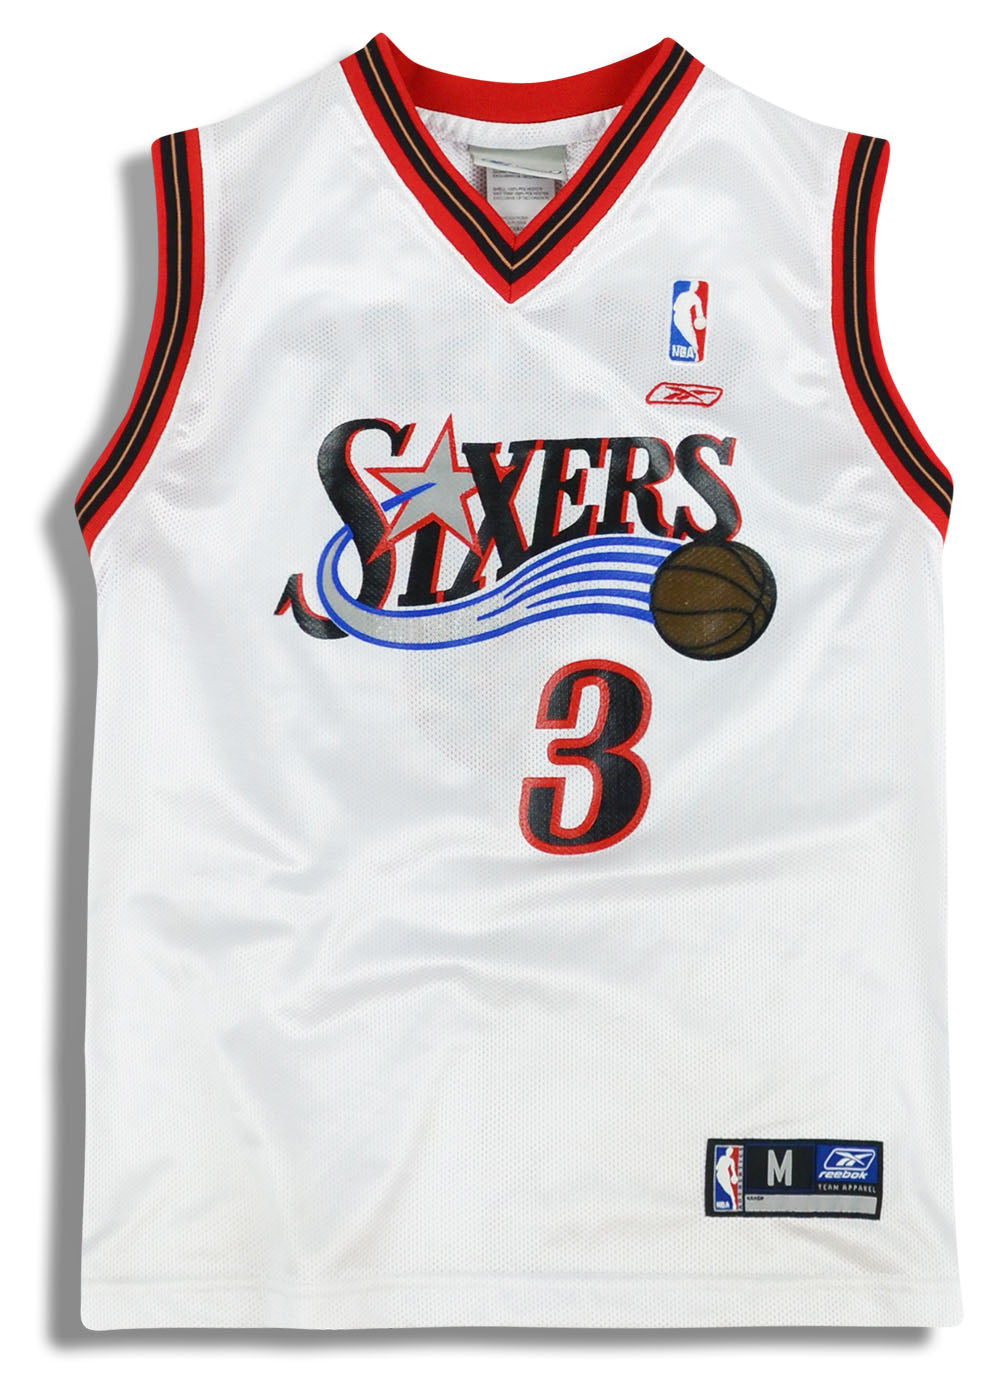 Reebok “Iverson” Replica Sixers Jersey Size “Large”